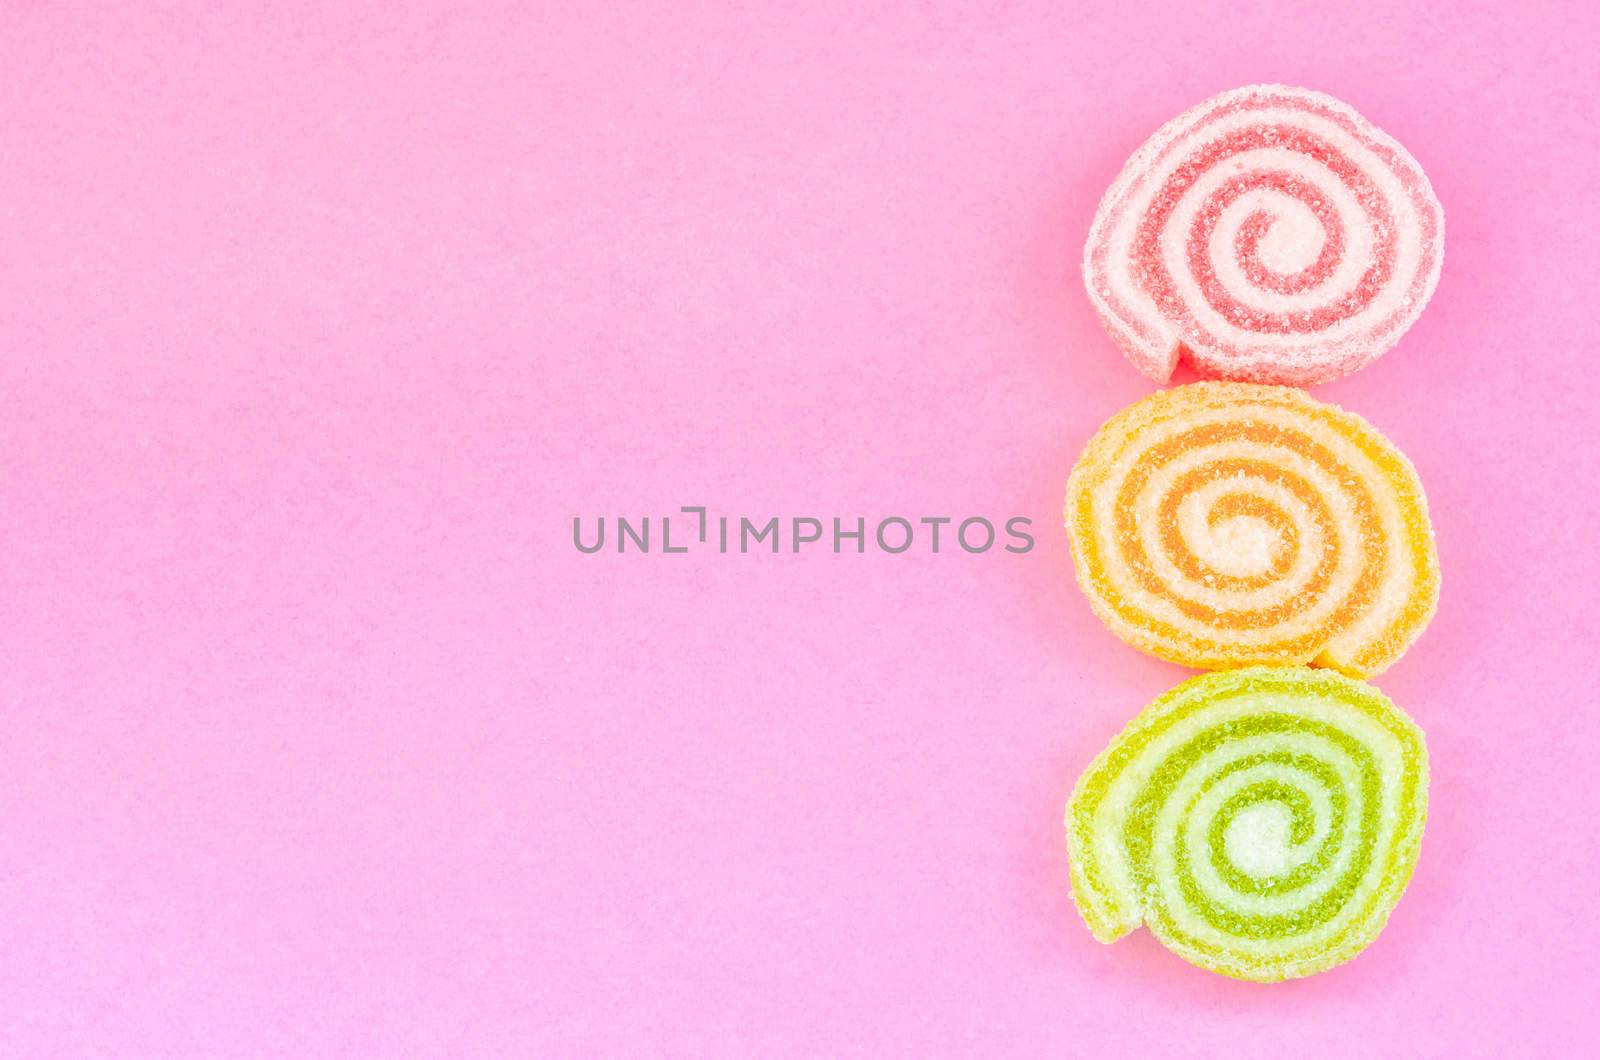 Jelly sweet, flavor fruit, candy dessert colorful with copy space on pink background.